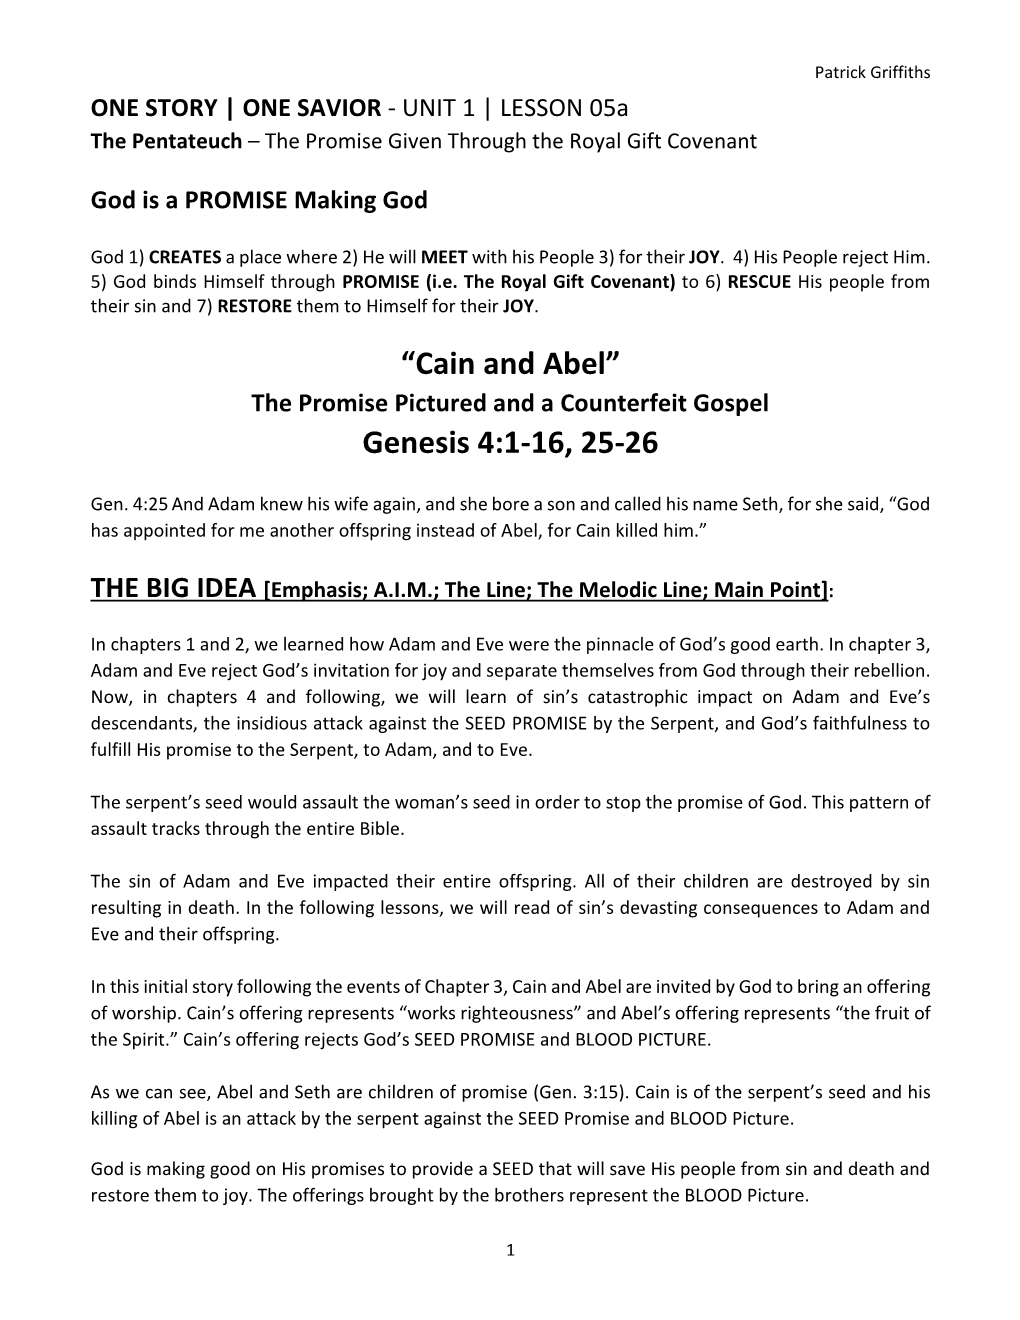 Cain and Abel” the Promise Pictured and a Counterfeit Gospel Genesis 4:1-16, 25-26